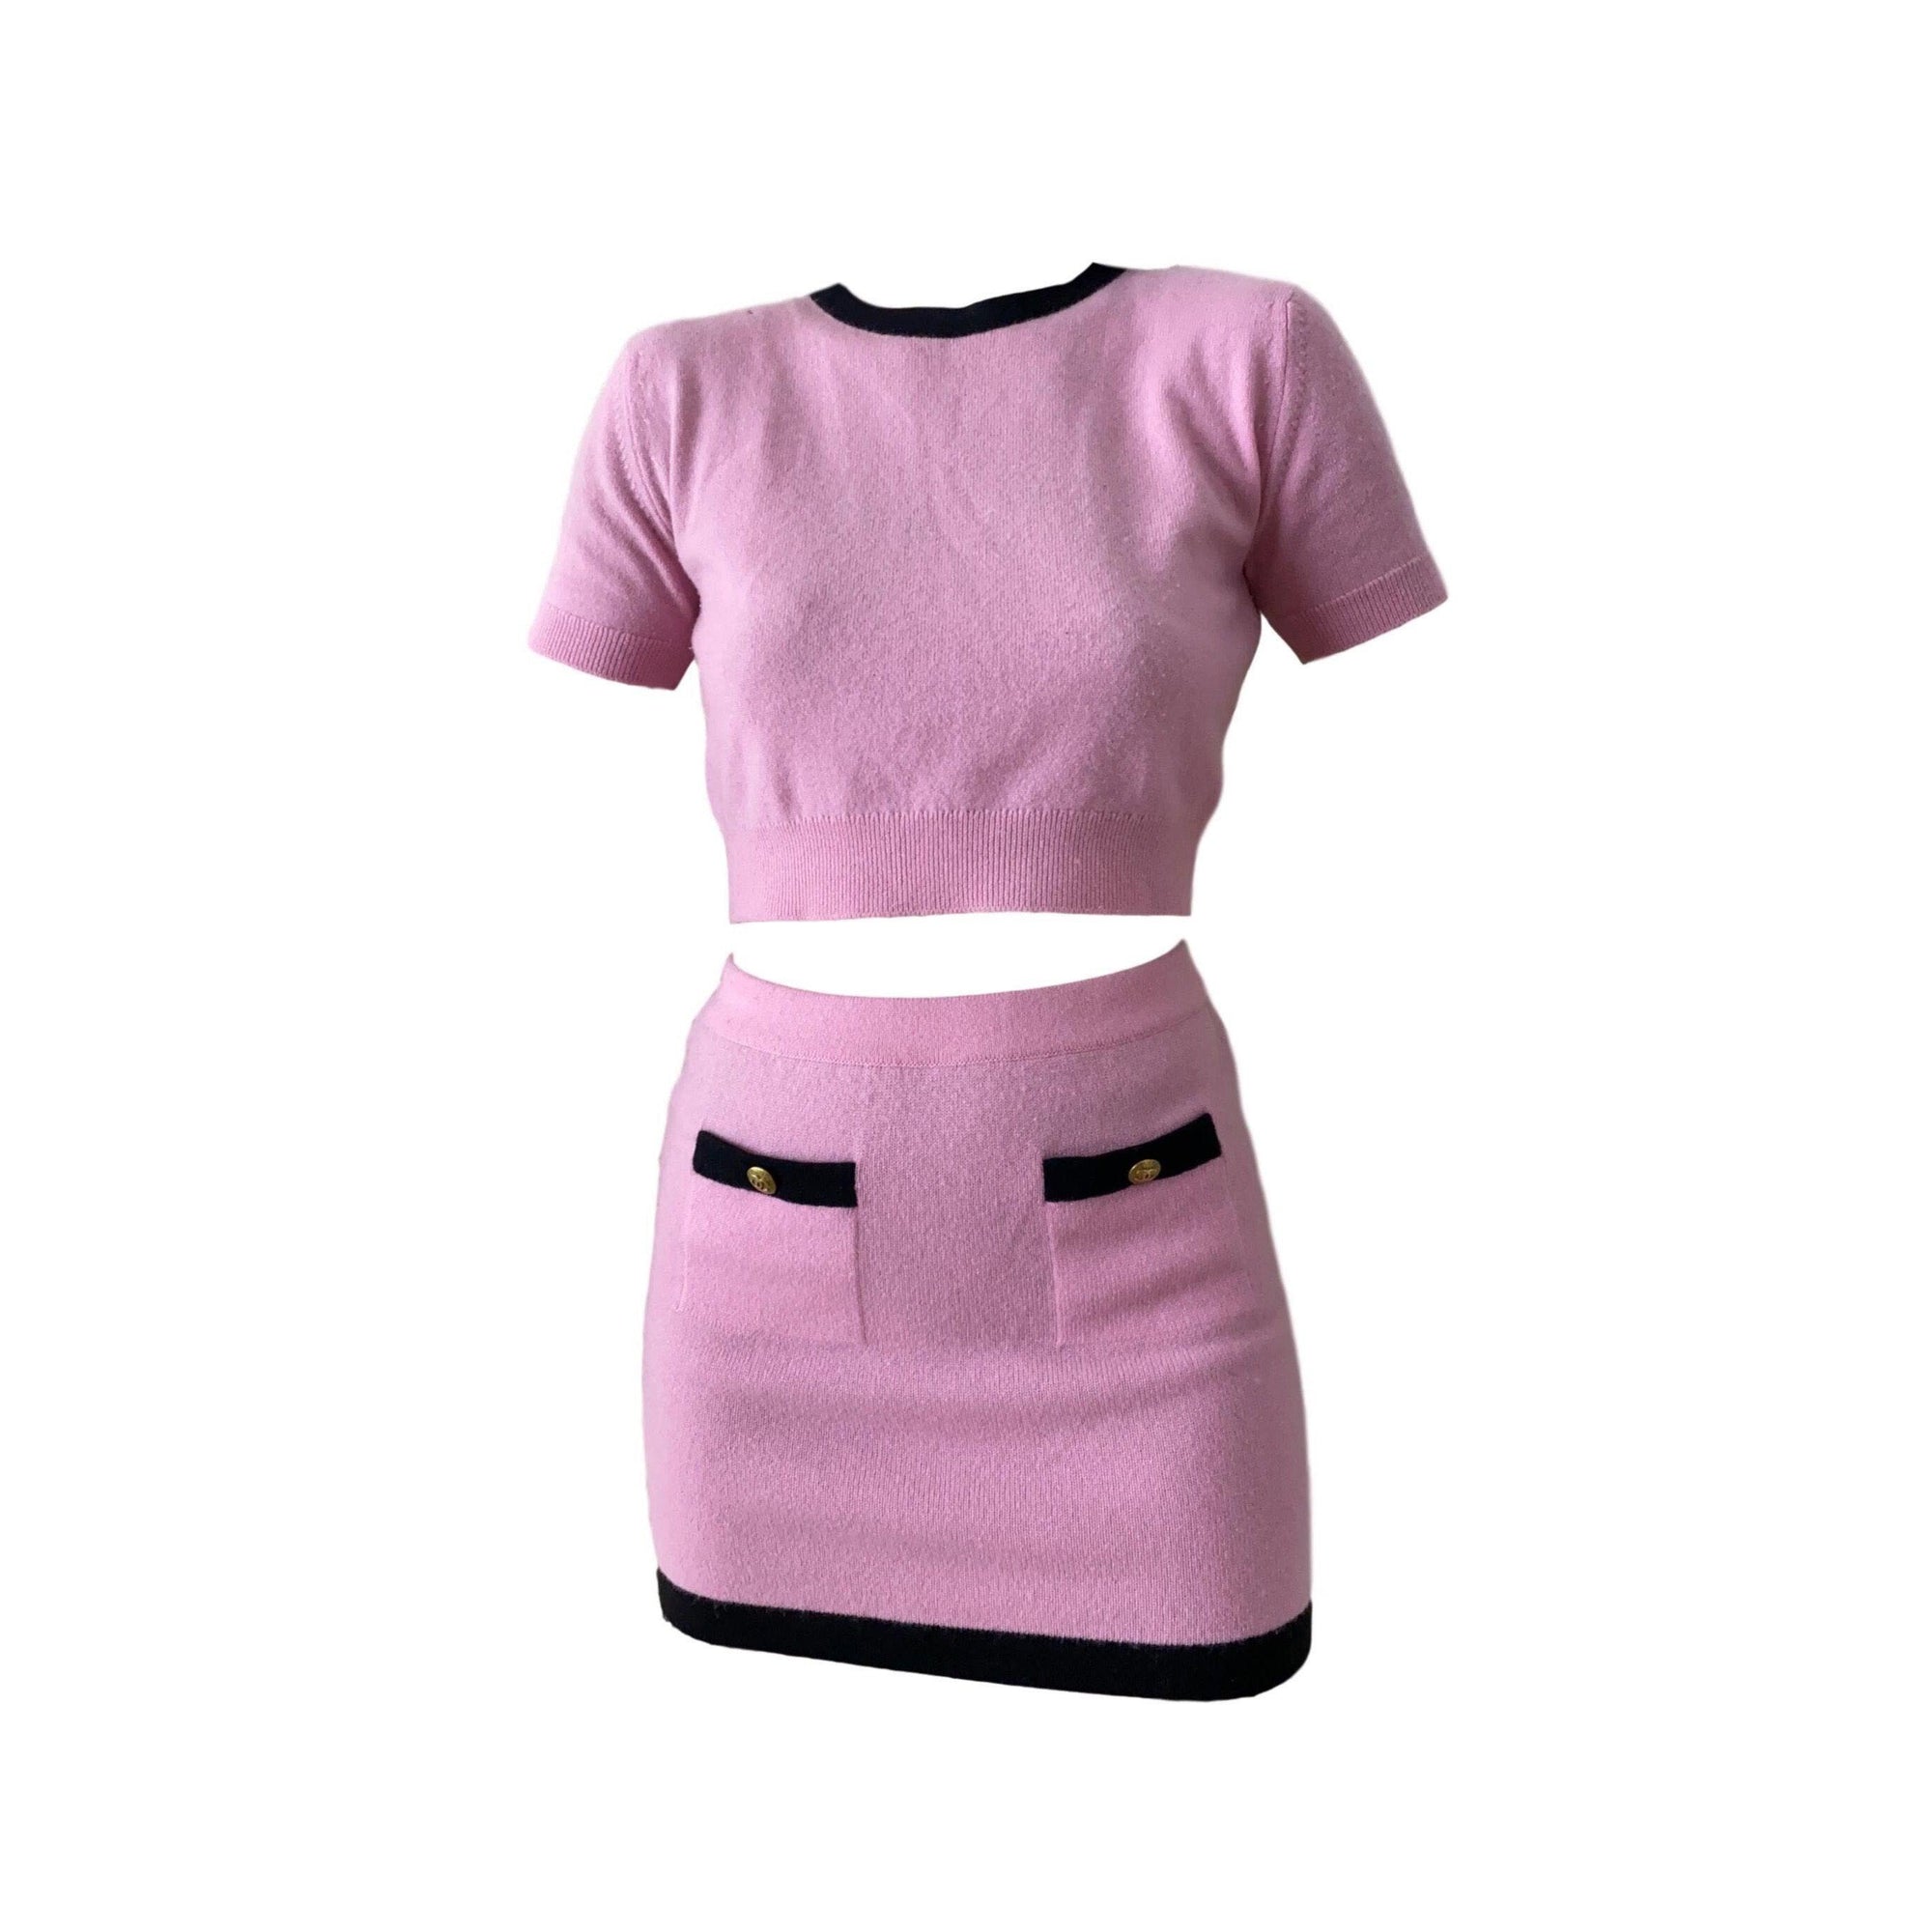 Chanel Pink Cashmere 3-Piece Cropped Set - Apparel